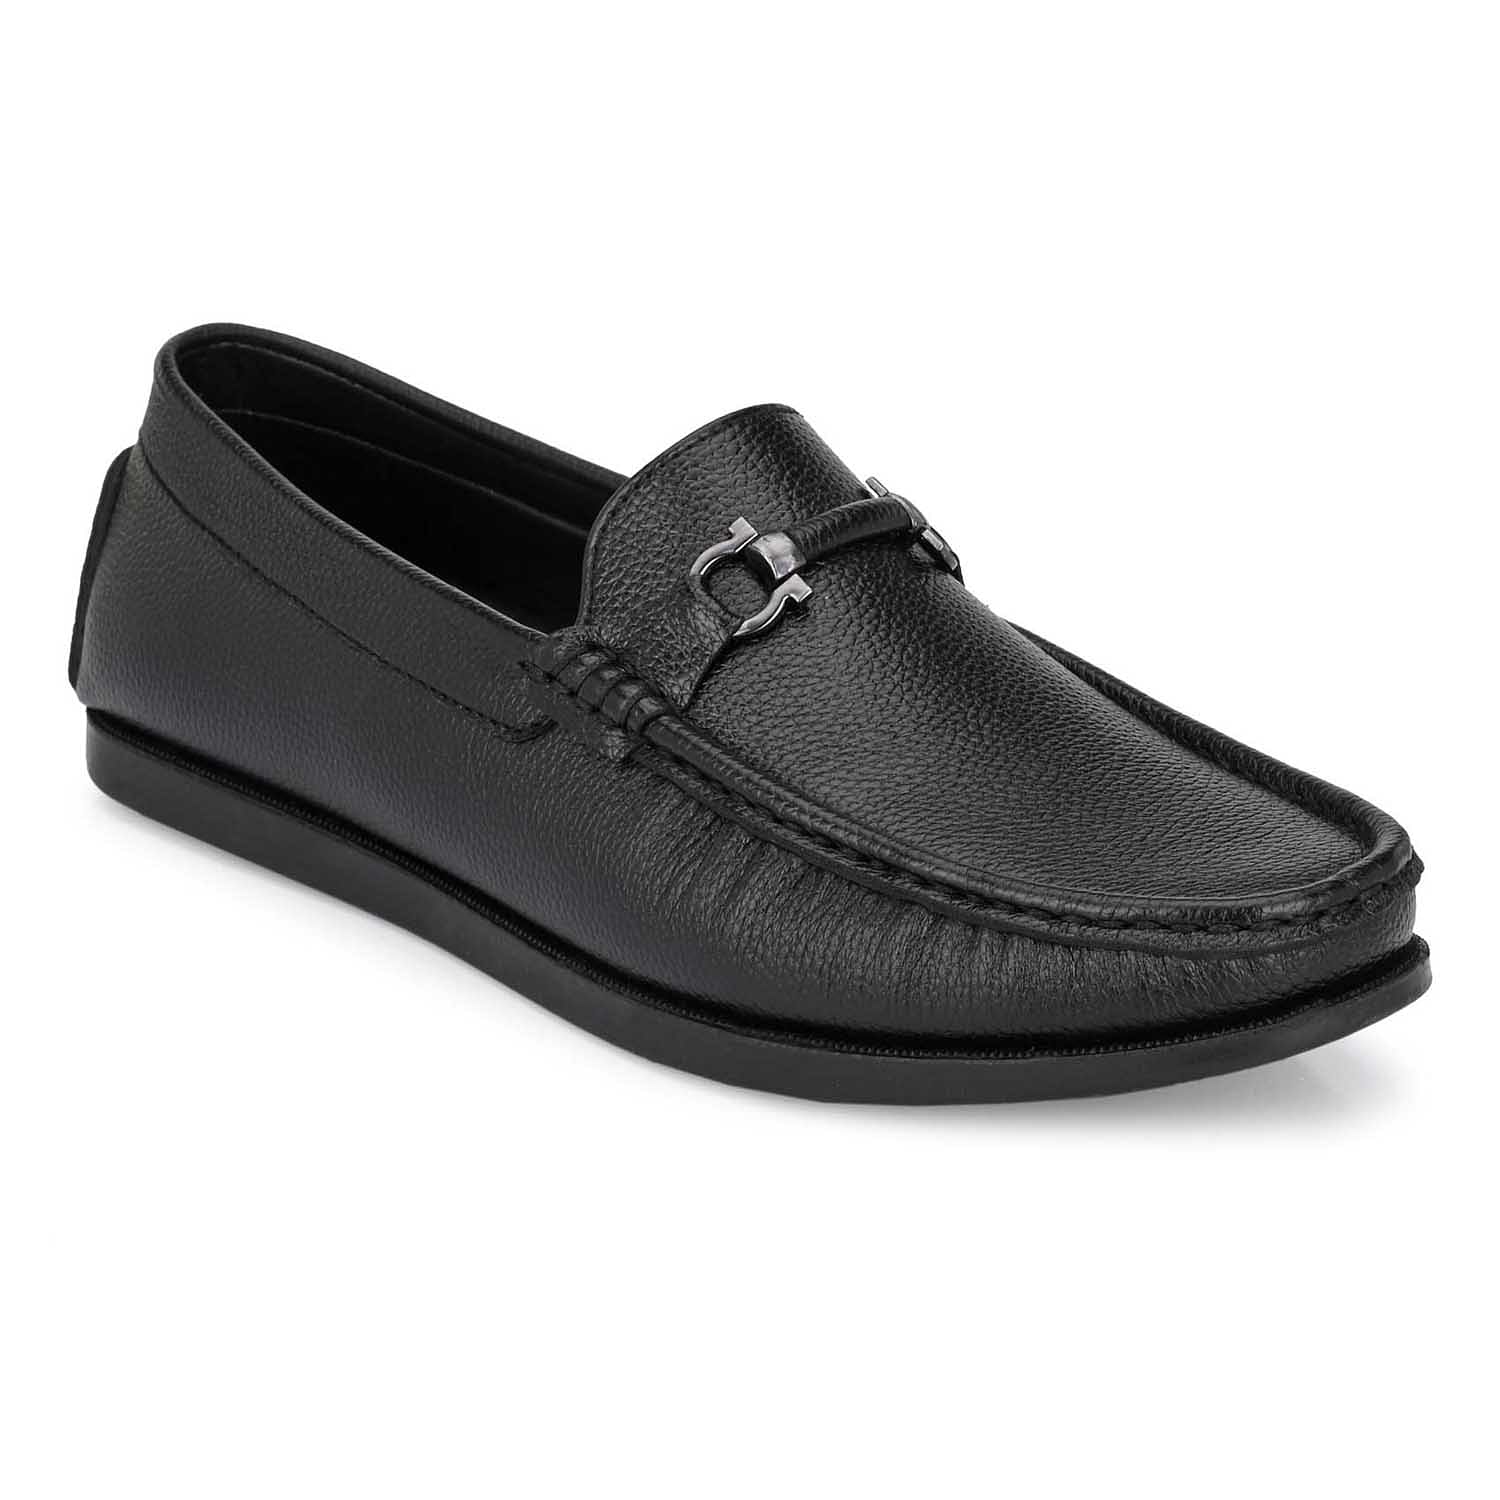 Pair-it Men's Loafers Shoes - Black-LZ-Loafer109